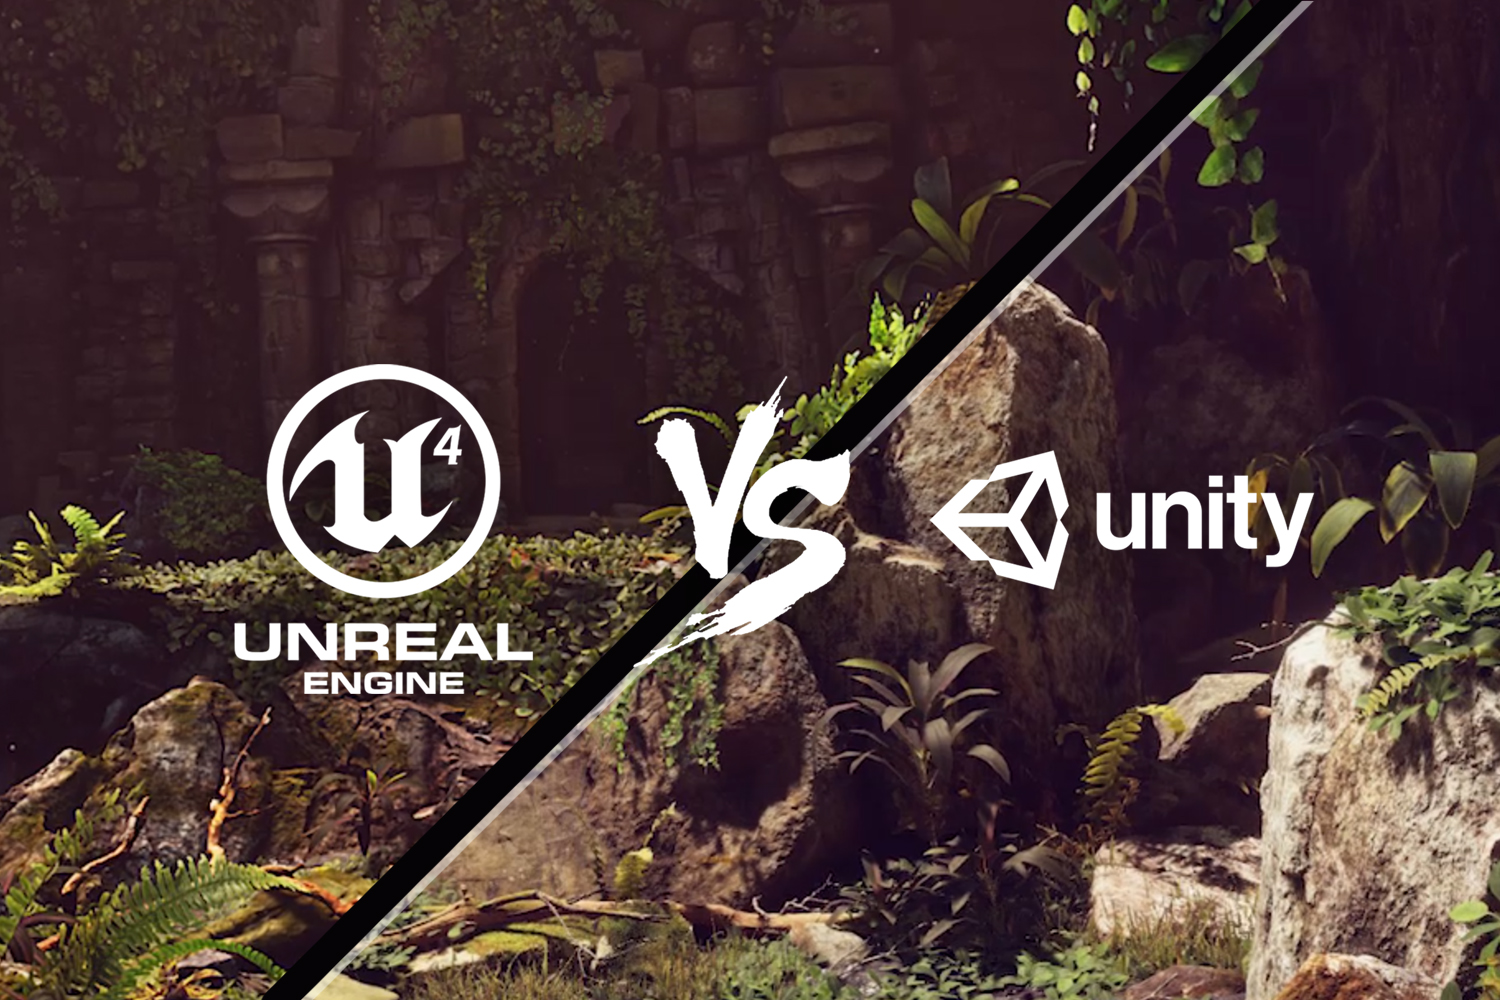 Unreal Engine for Mobile Games: Reasons to Choose